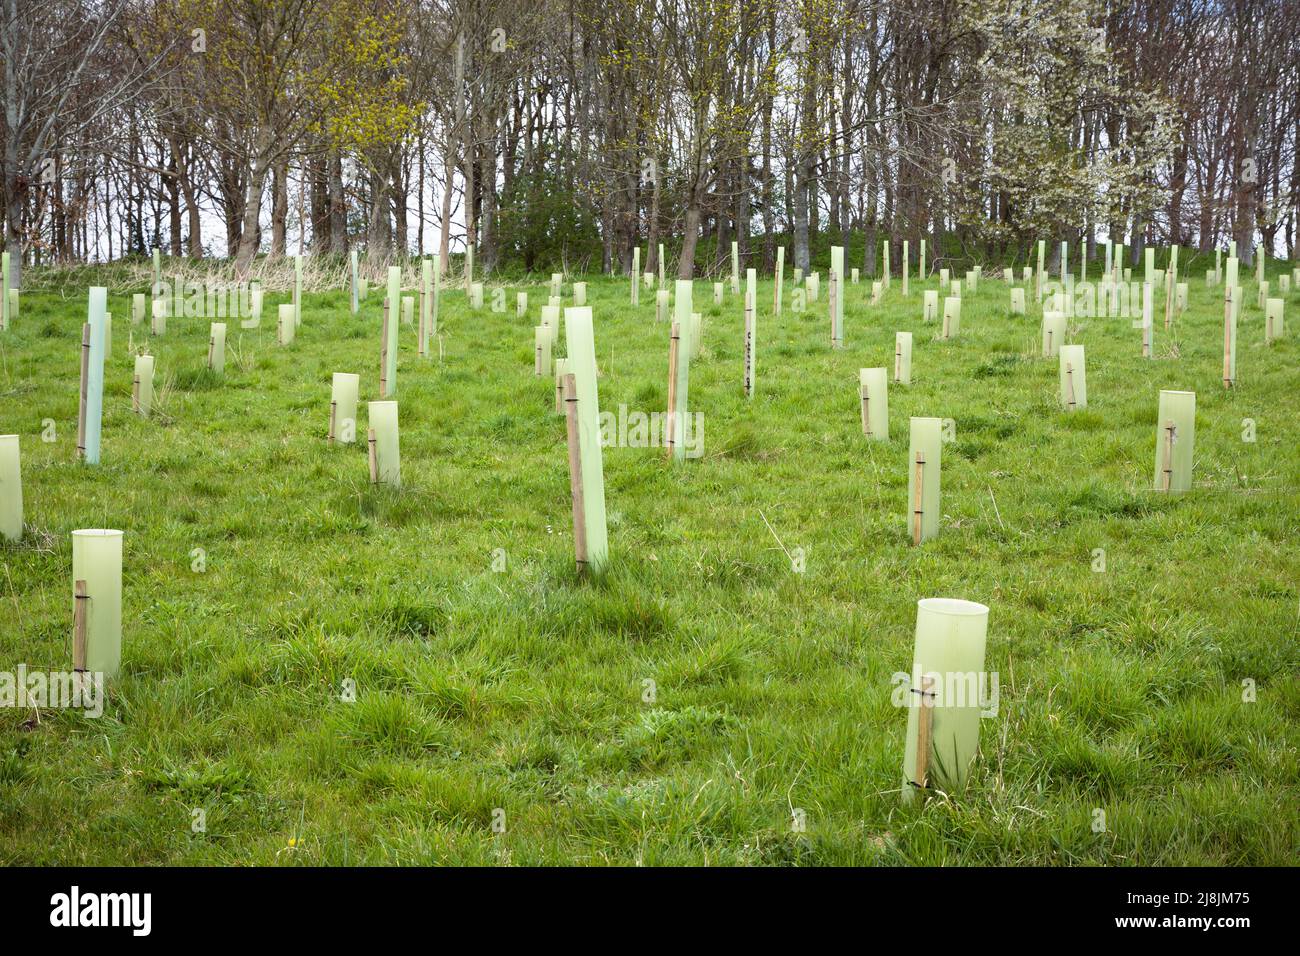 Planting trees, tree saplings with guards growing in a field in Buckinghamshire, UK Stock Photo